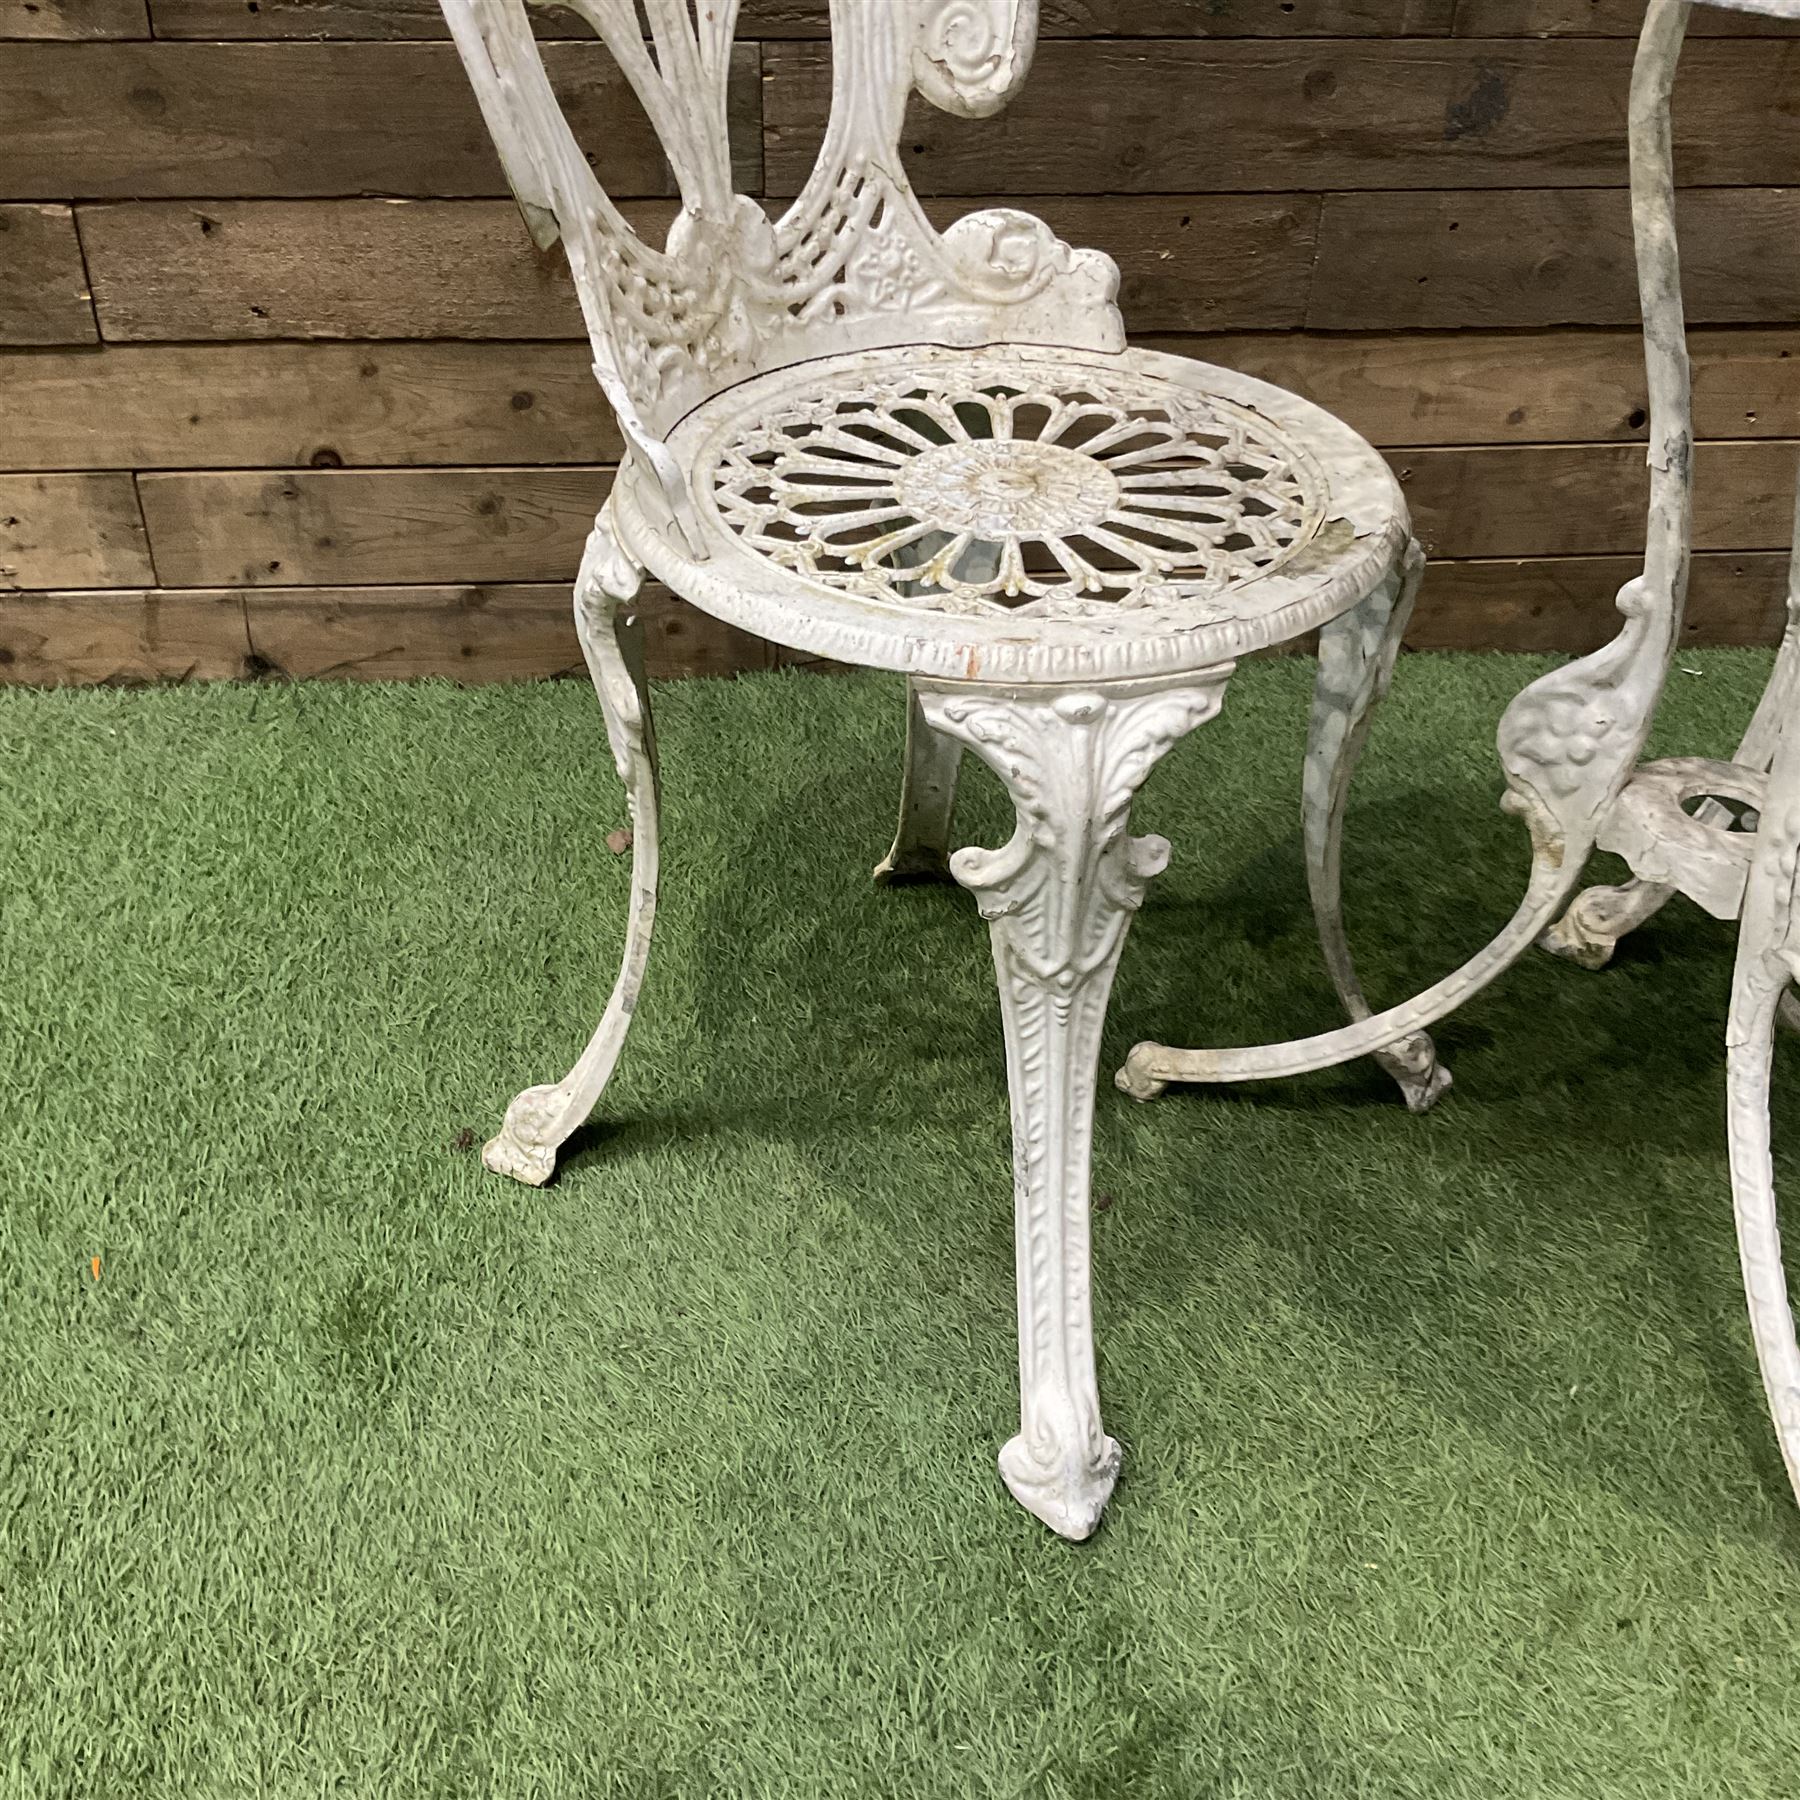 Cast aluminium circular garden table and two chairs - Image 4 of 5